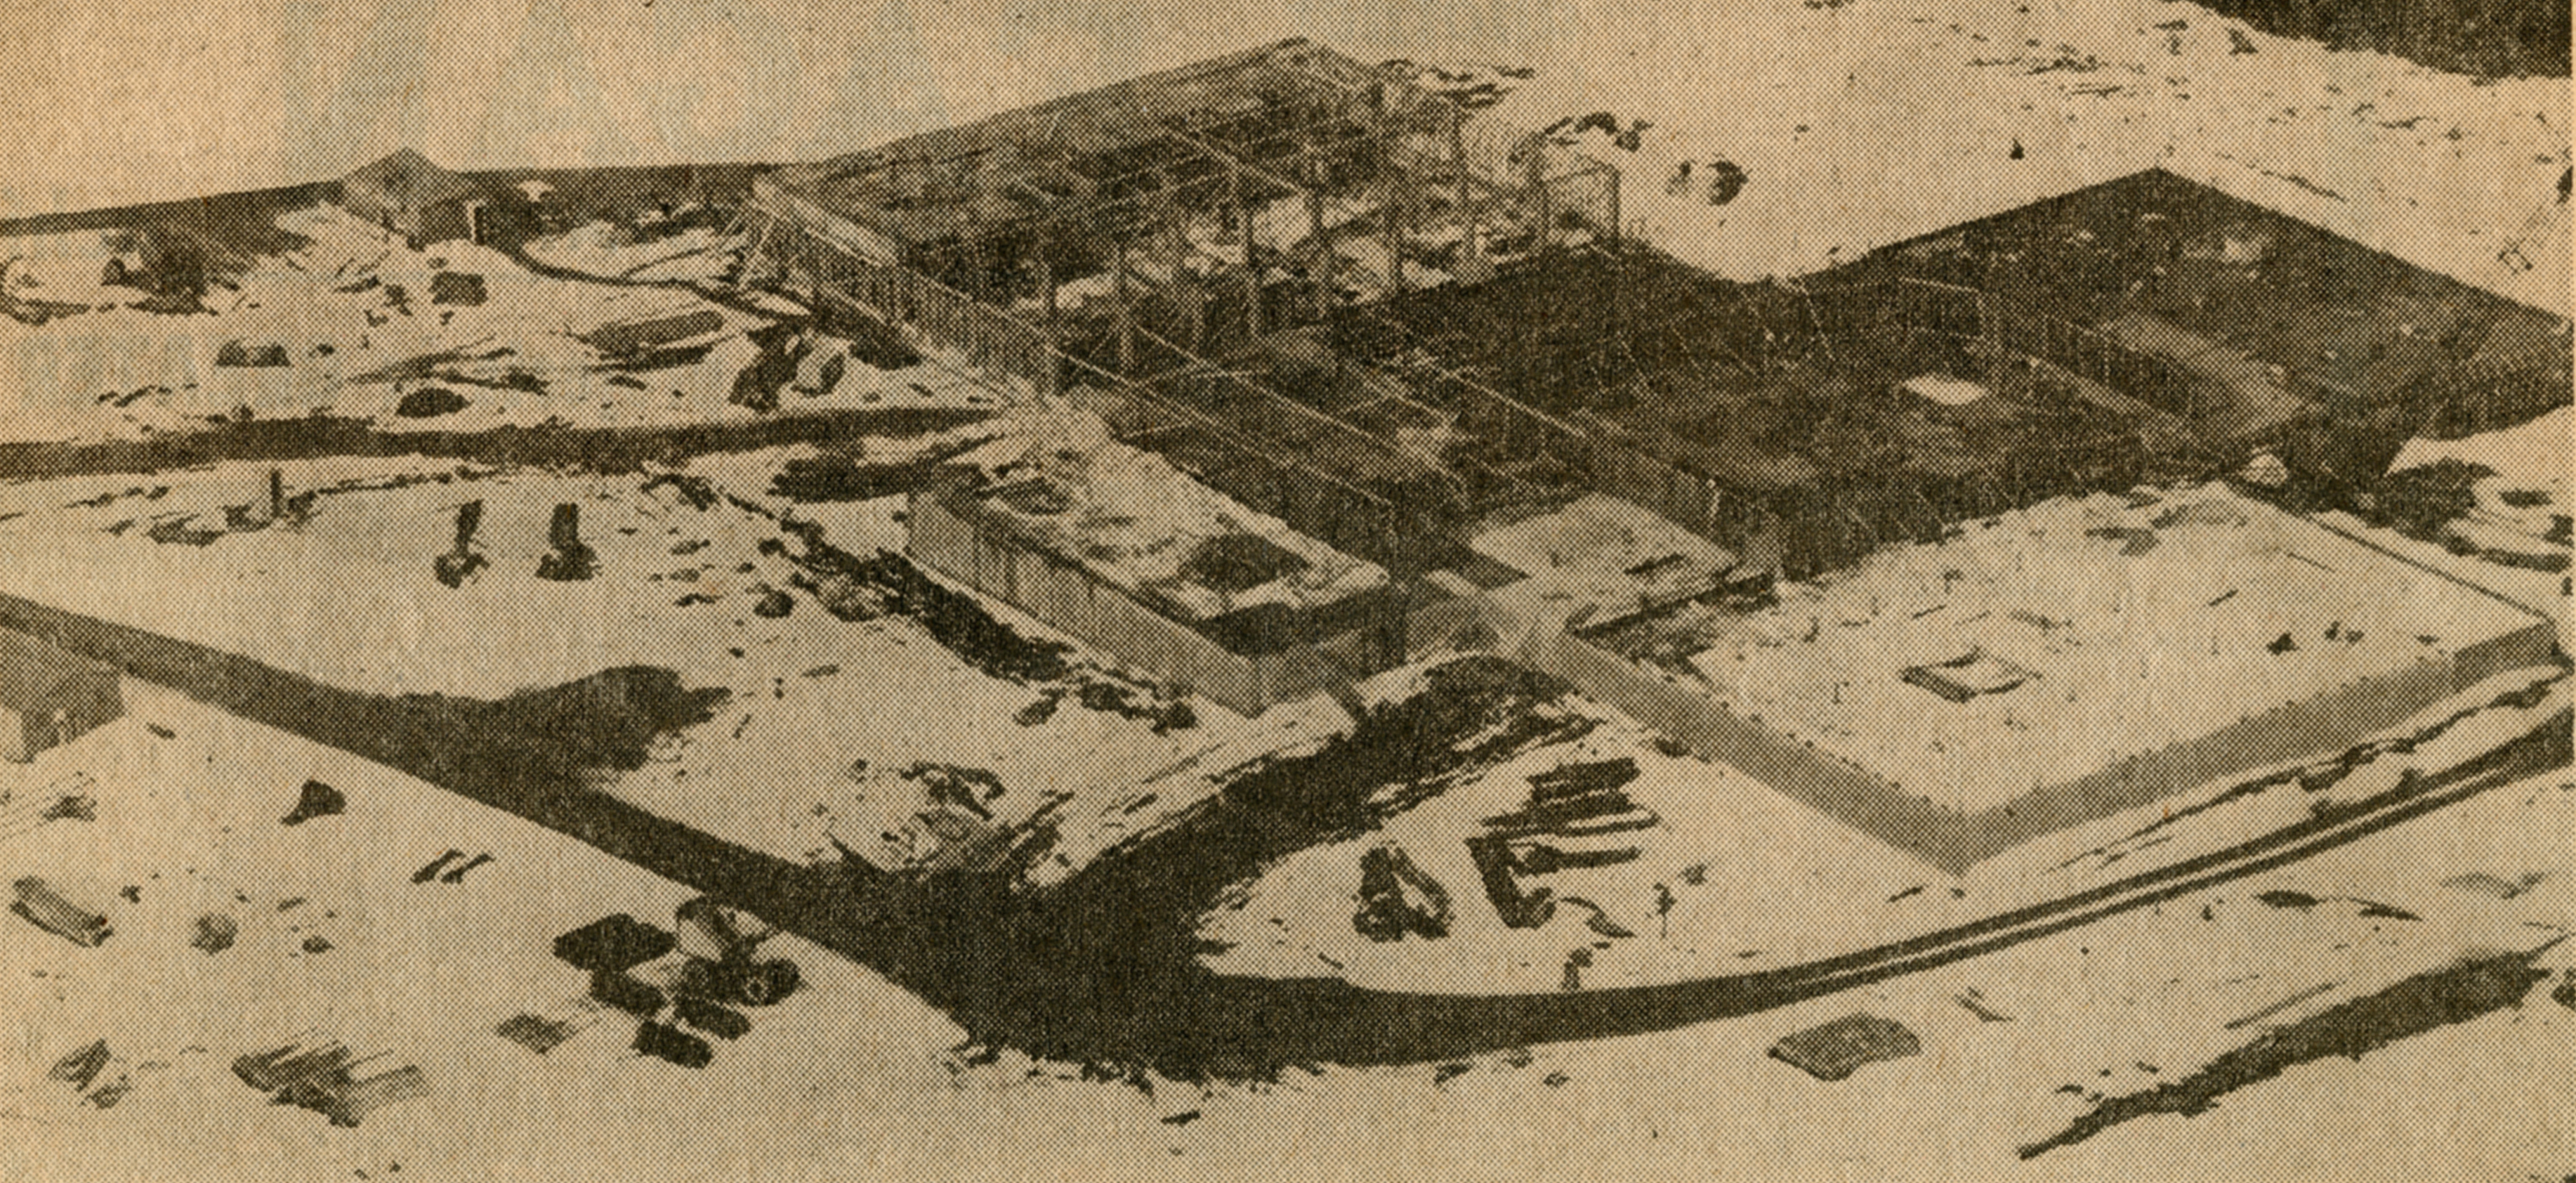 Community Hospital construction, January 22, 1961. Published by the Post-Standard. Collection of the Onondaga Historical Association.